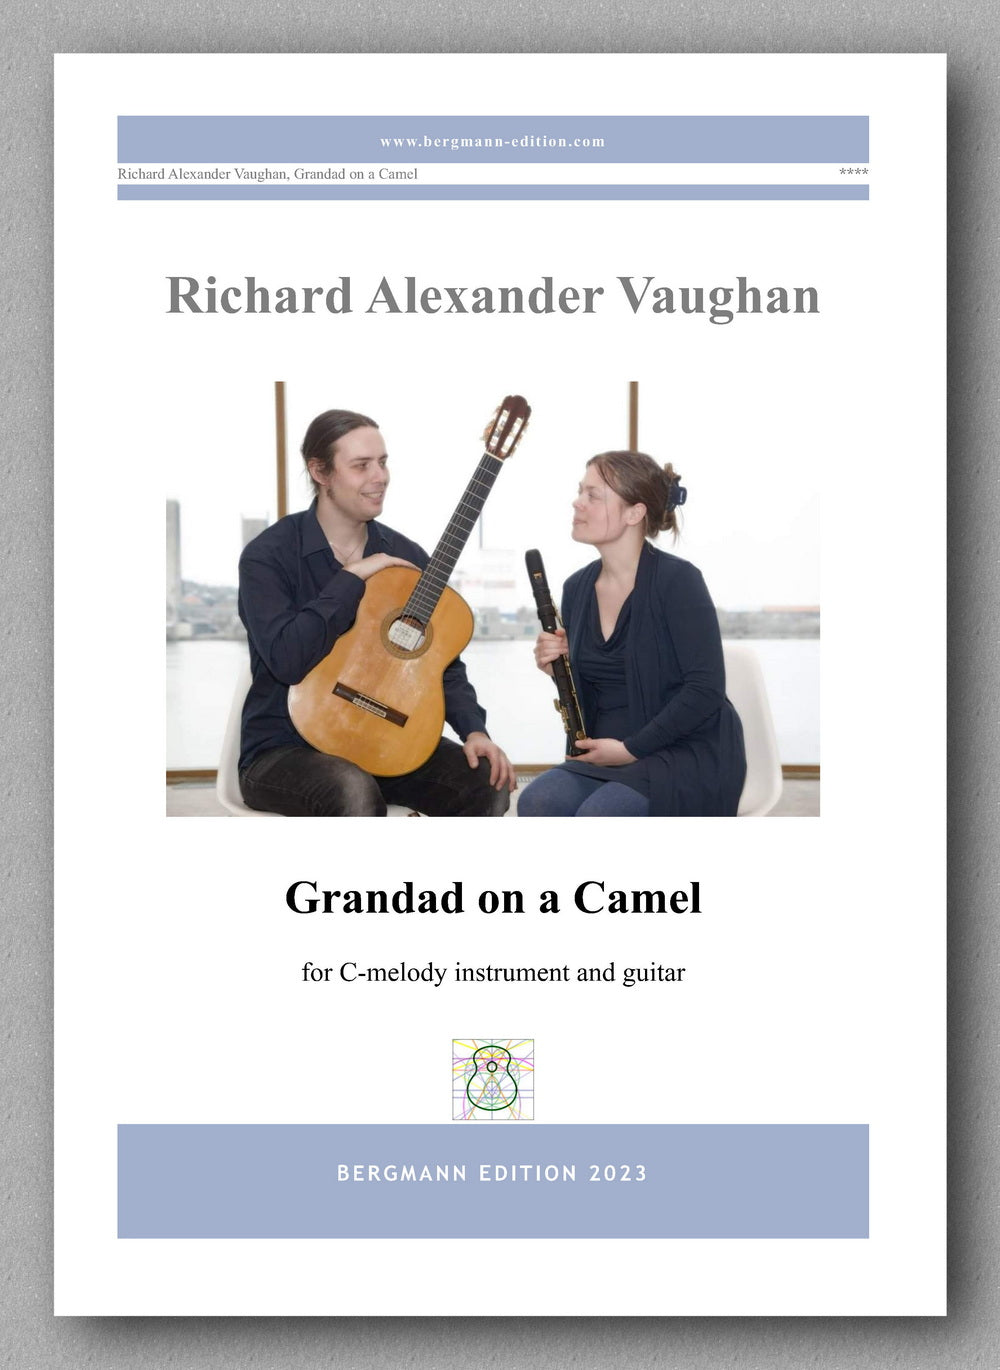 Grandad on a Camel by Richard Alexander Vaughan - preview of the cover